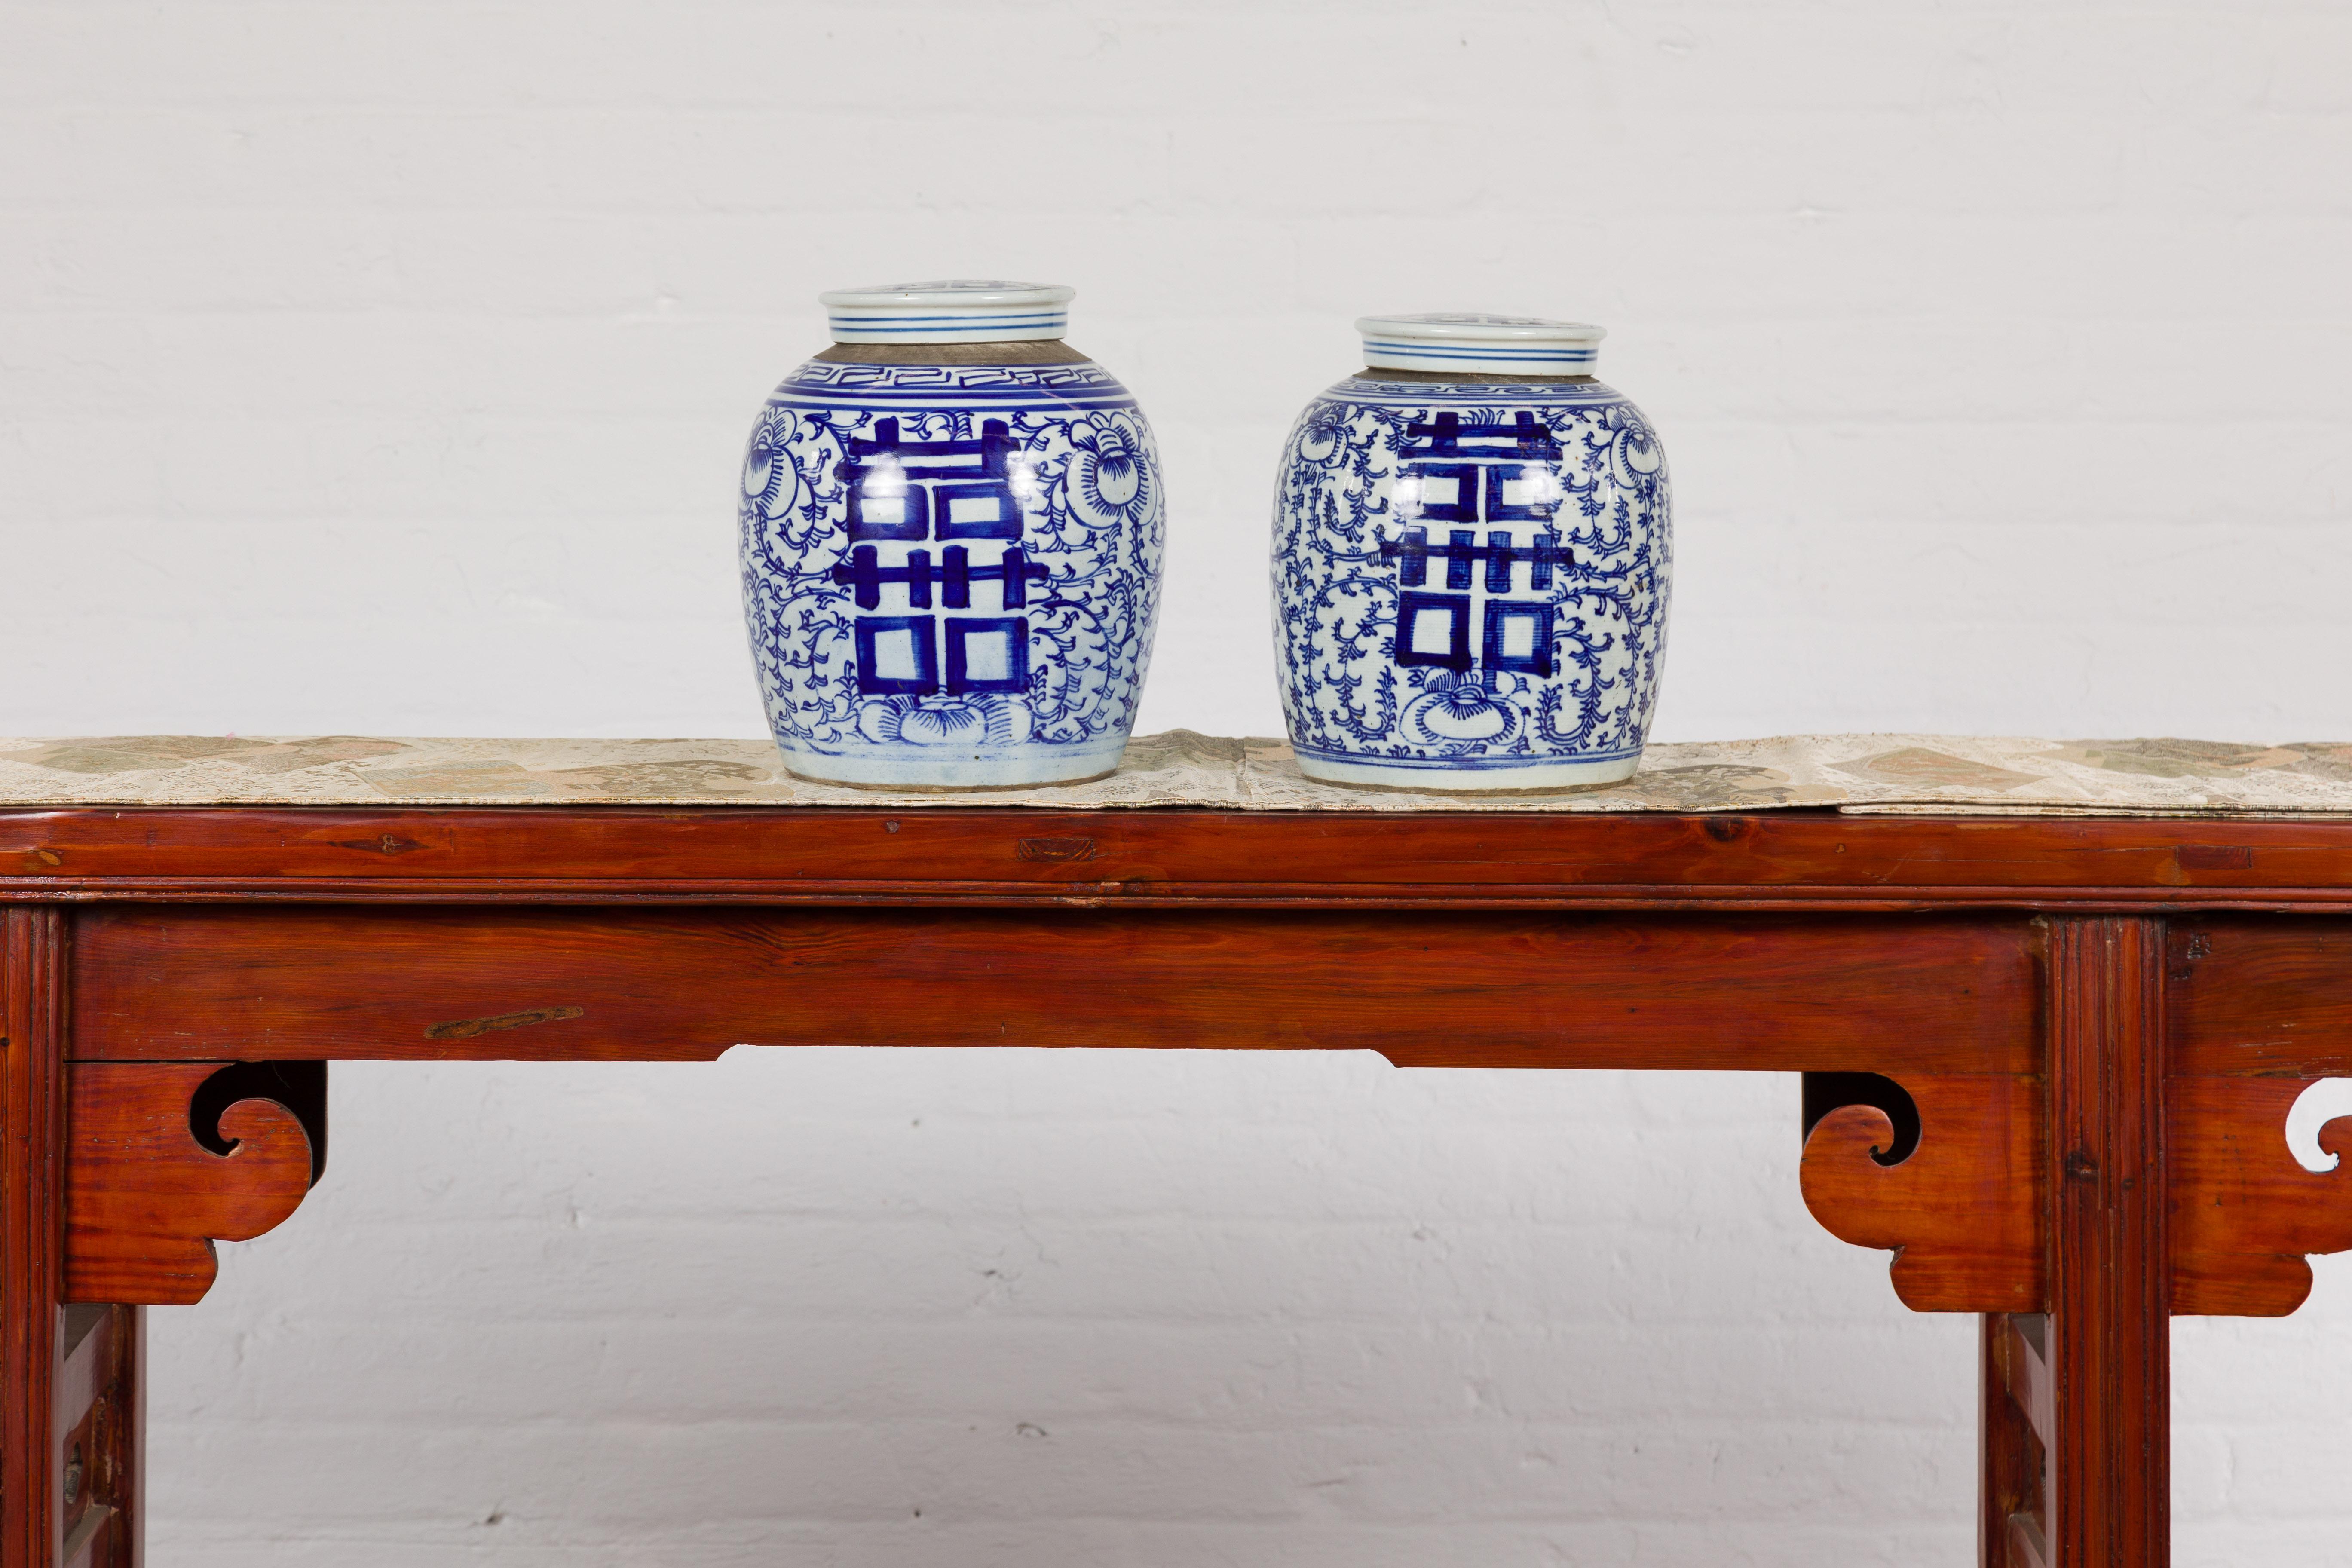 A near pair of Chinese lidded blue and white porcelain ginger jars from the mid 20th century with double happiness signs on scrolling foliage. Emanating elegance and harmony, this near pair of Chinese blue and white porcelain ginger jars from the